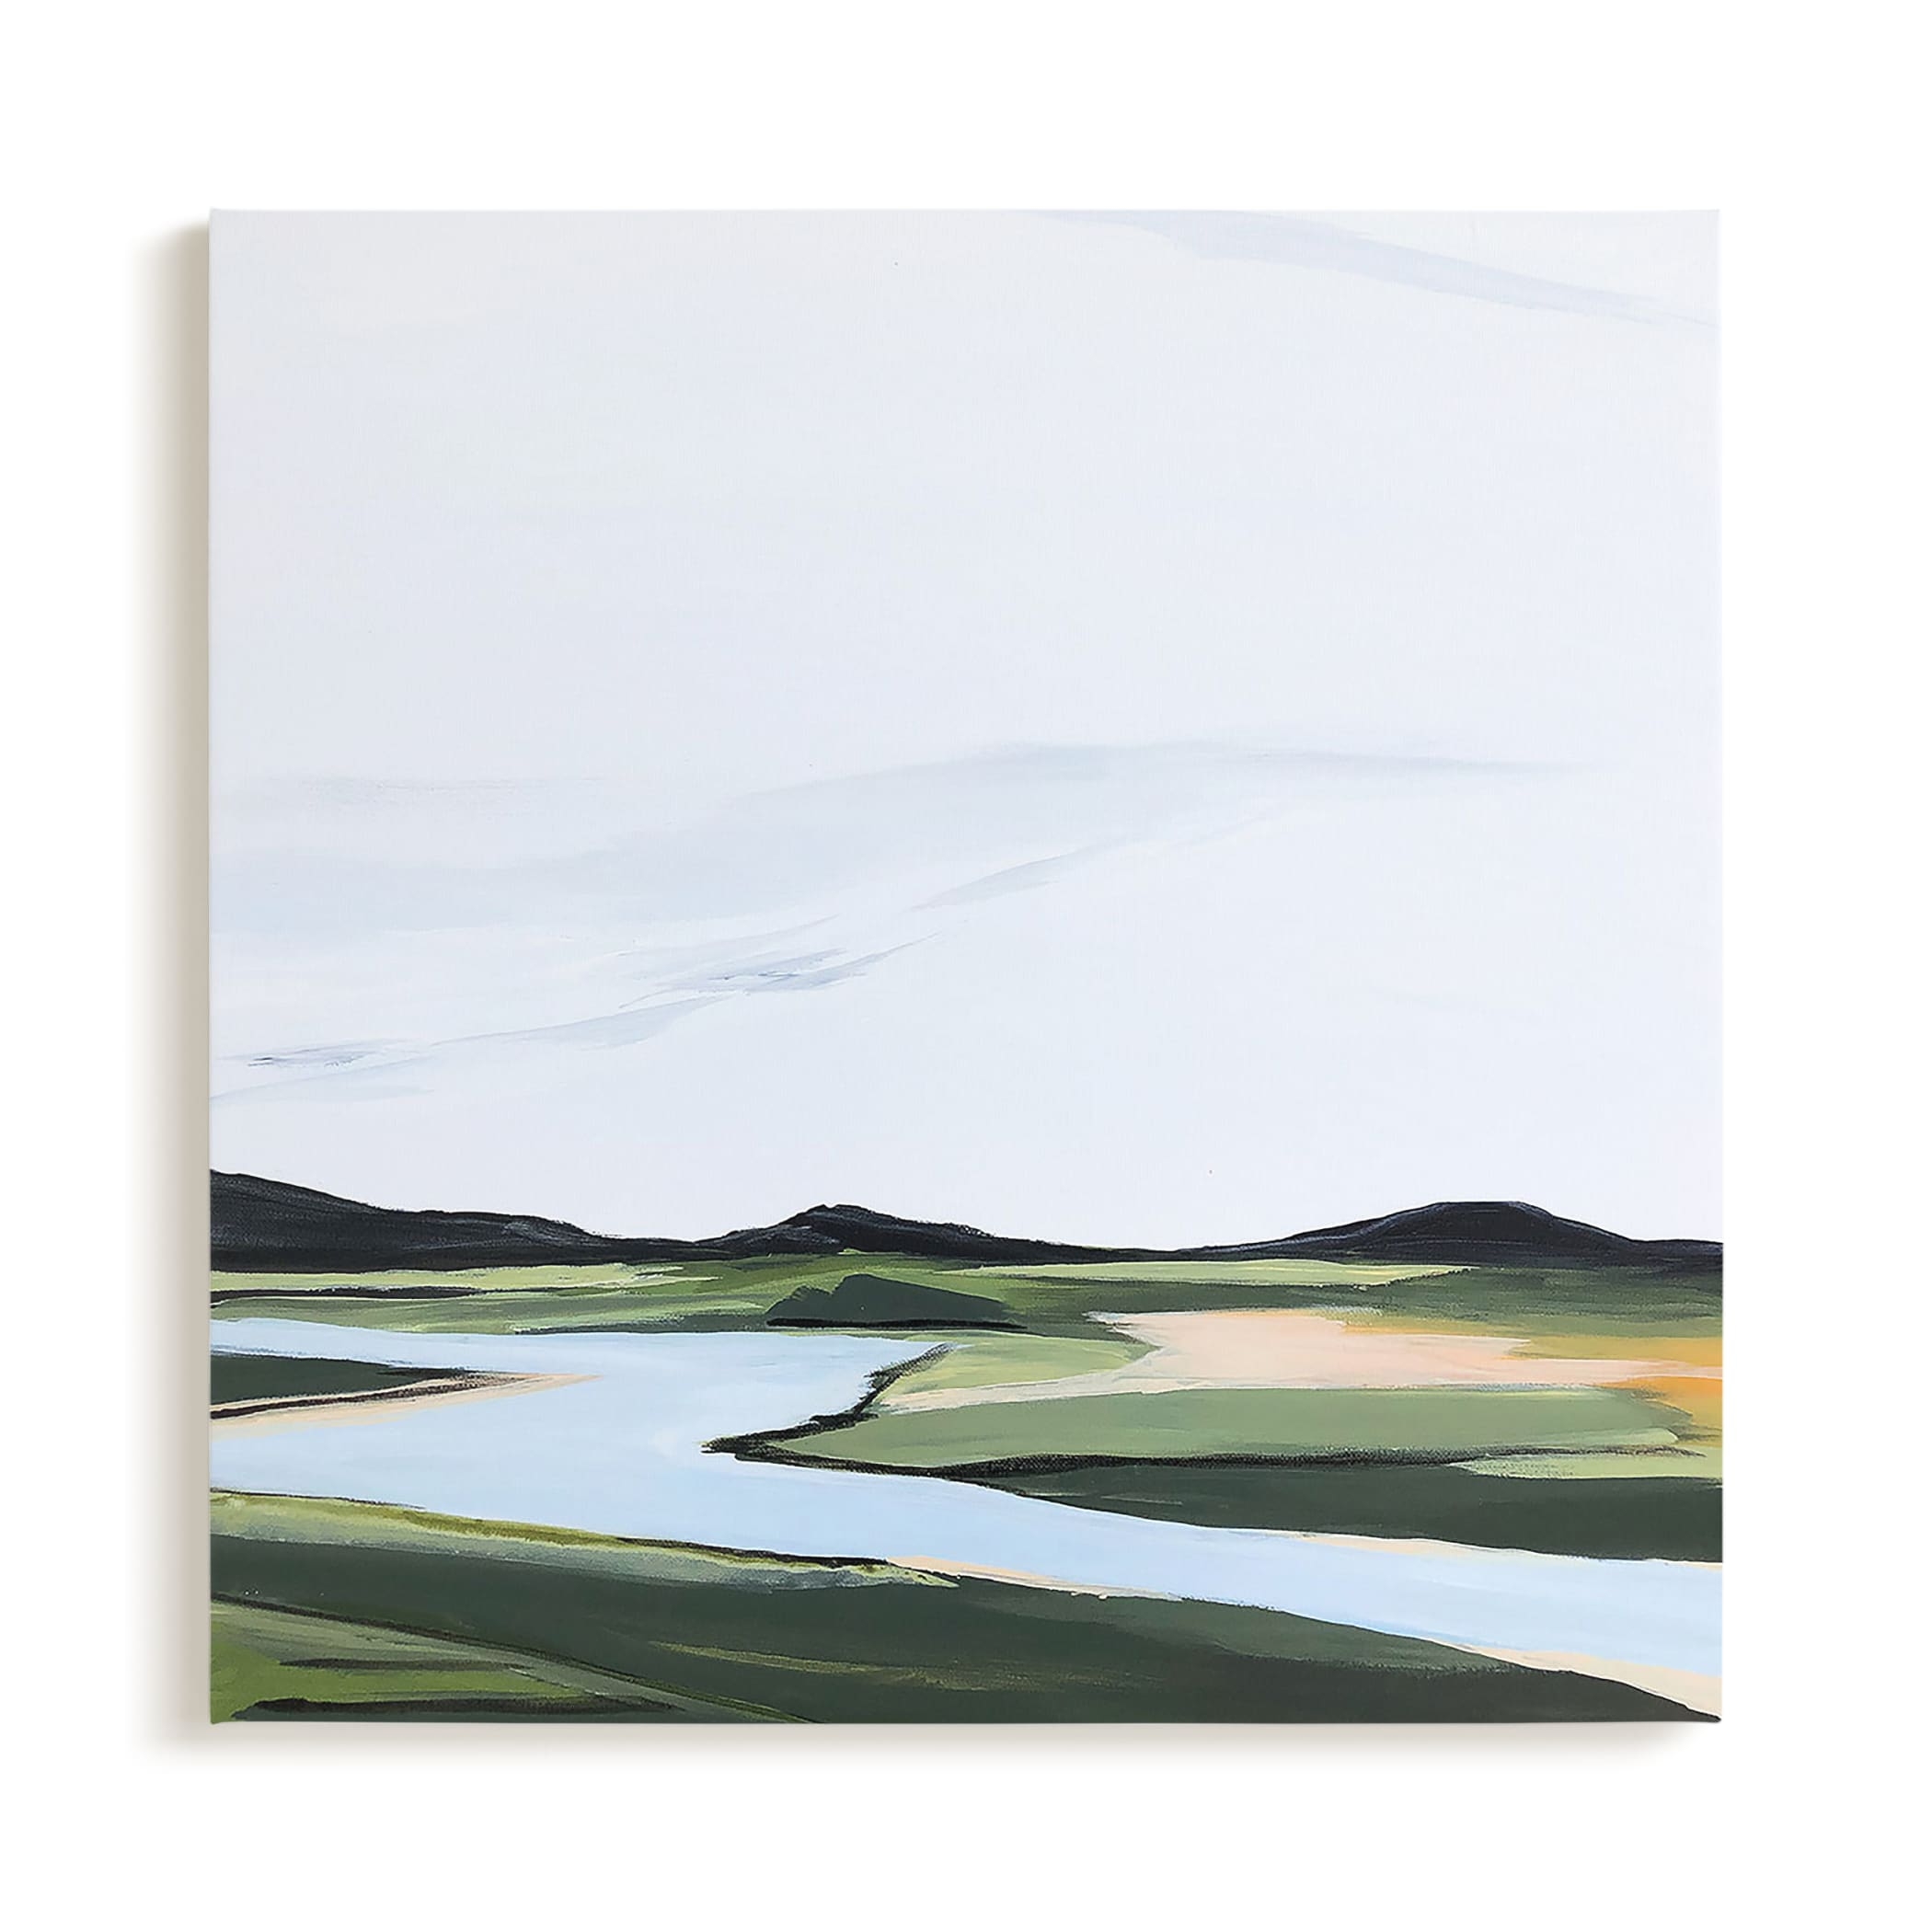 County Road River Bank, Gallery Wrap, 24"x24" - Image 0